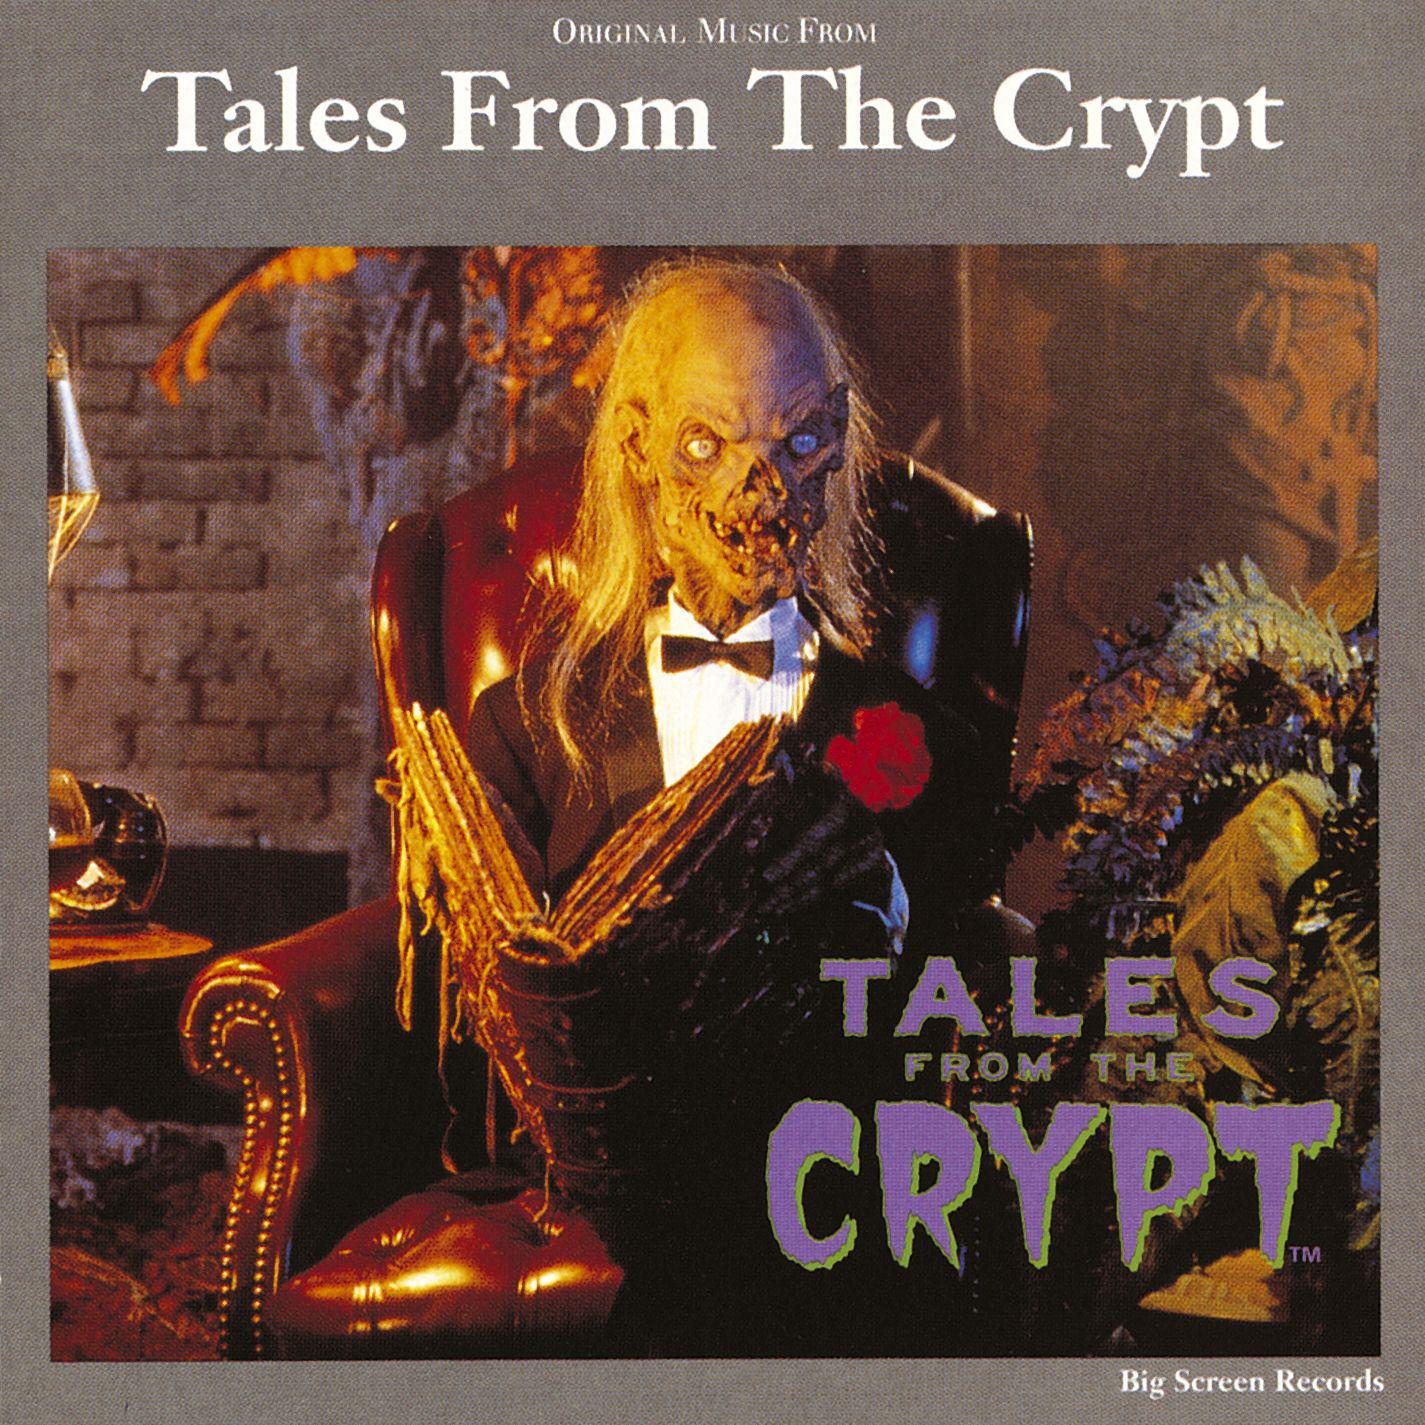 Original Music From Tales From The Crypt